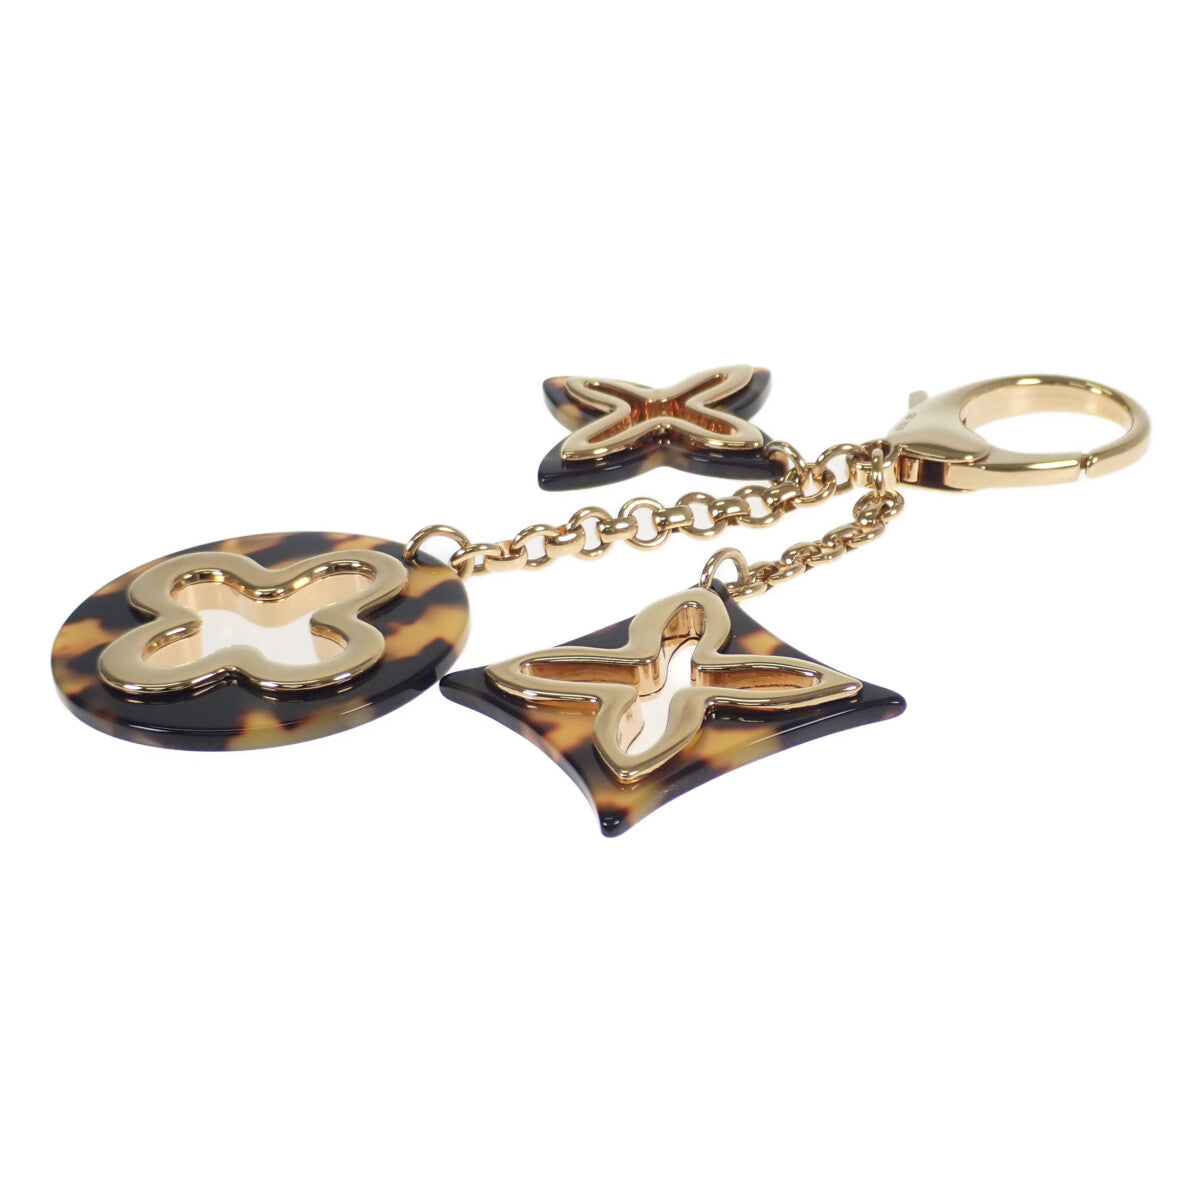 Louis Vuitton Insolence Bag Charm Metal Key Chain M65087 in Excellent condition